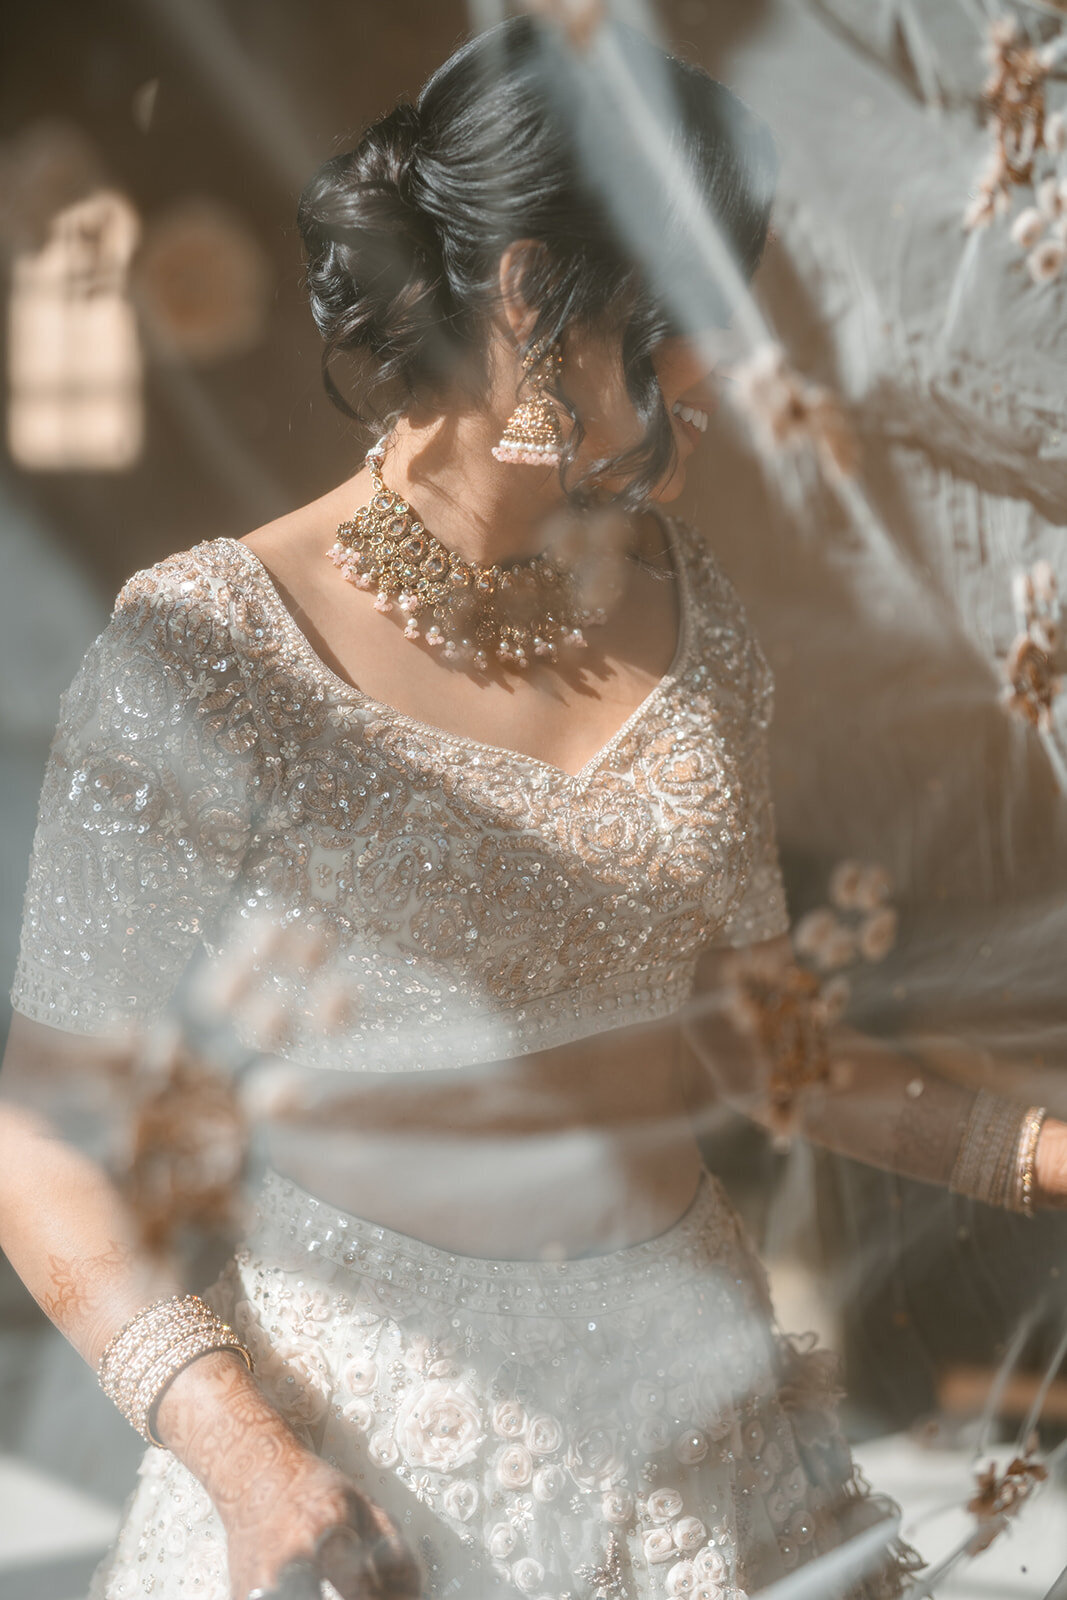 Miami Intimate Indian Wedding_Kristelle Boulos Photography-5